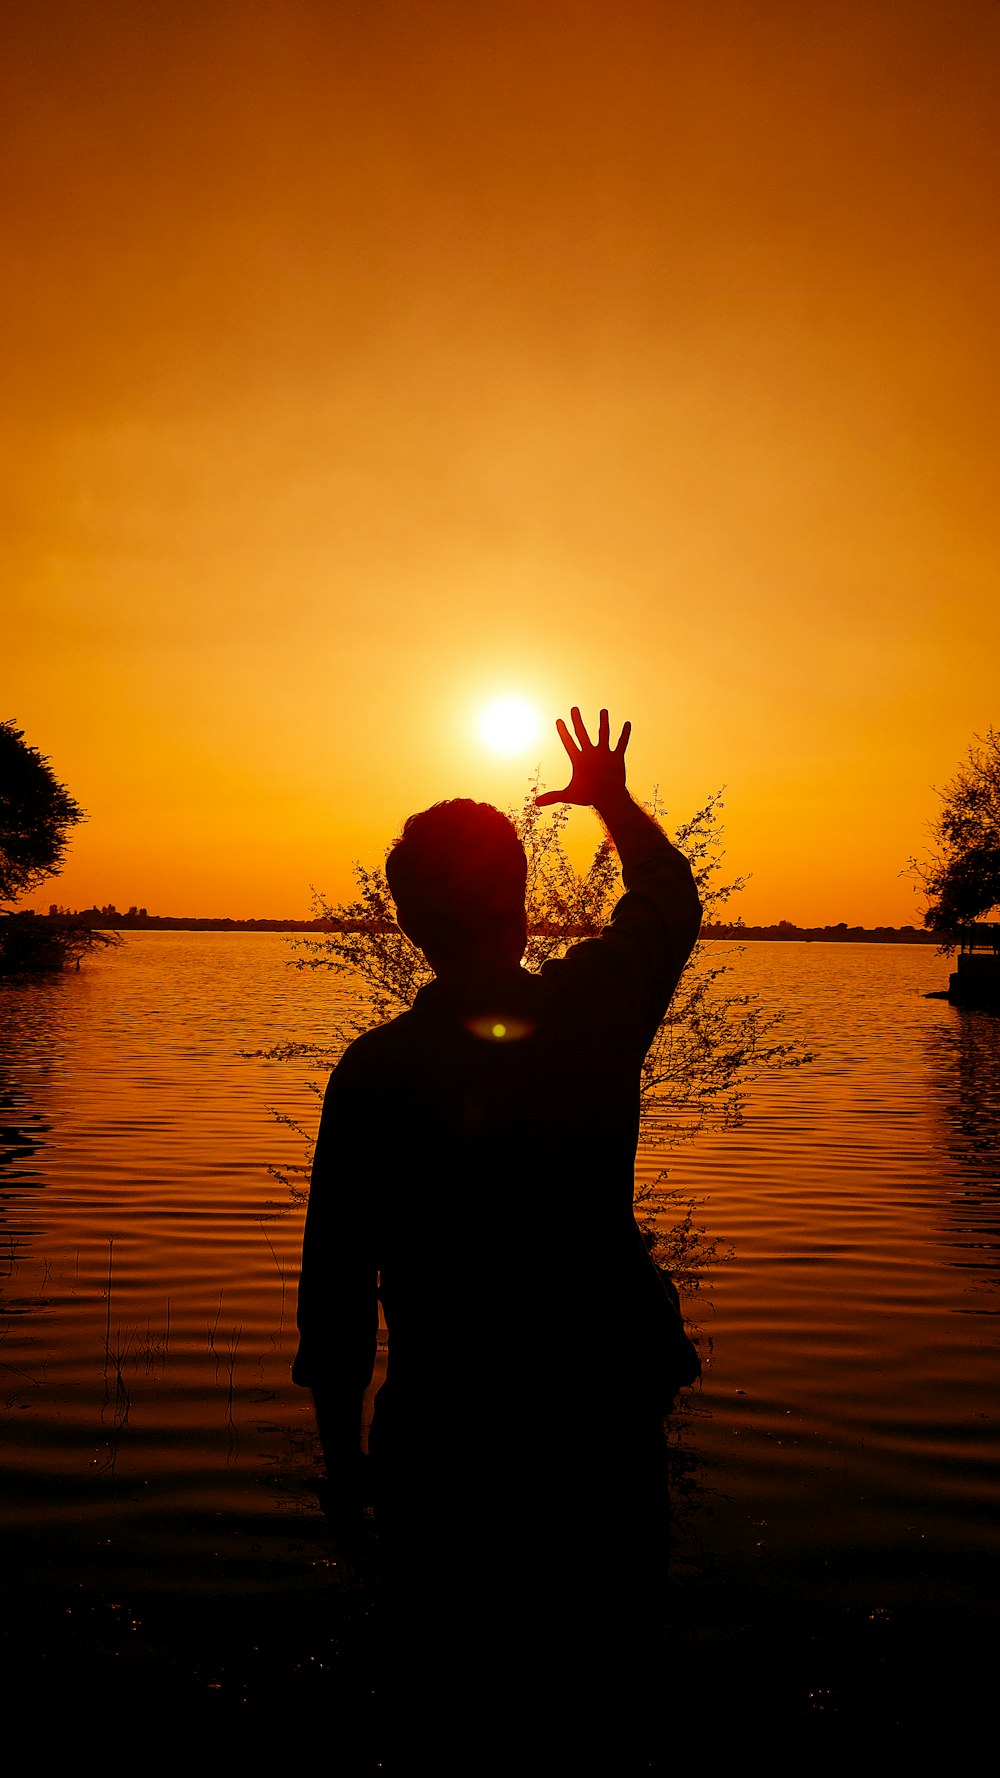 a person standing in a body of water at sunset